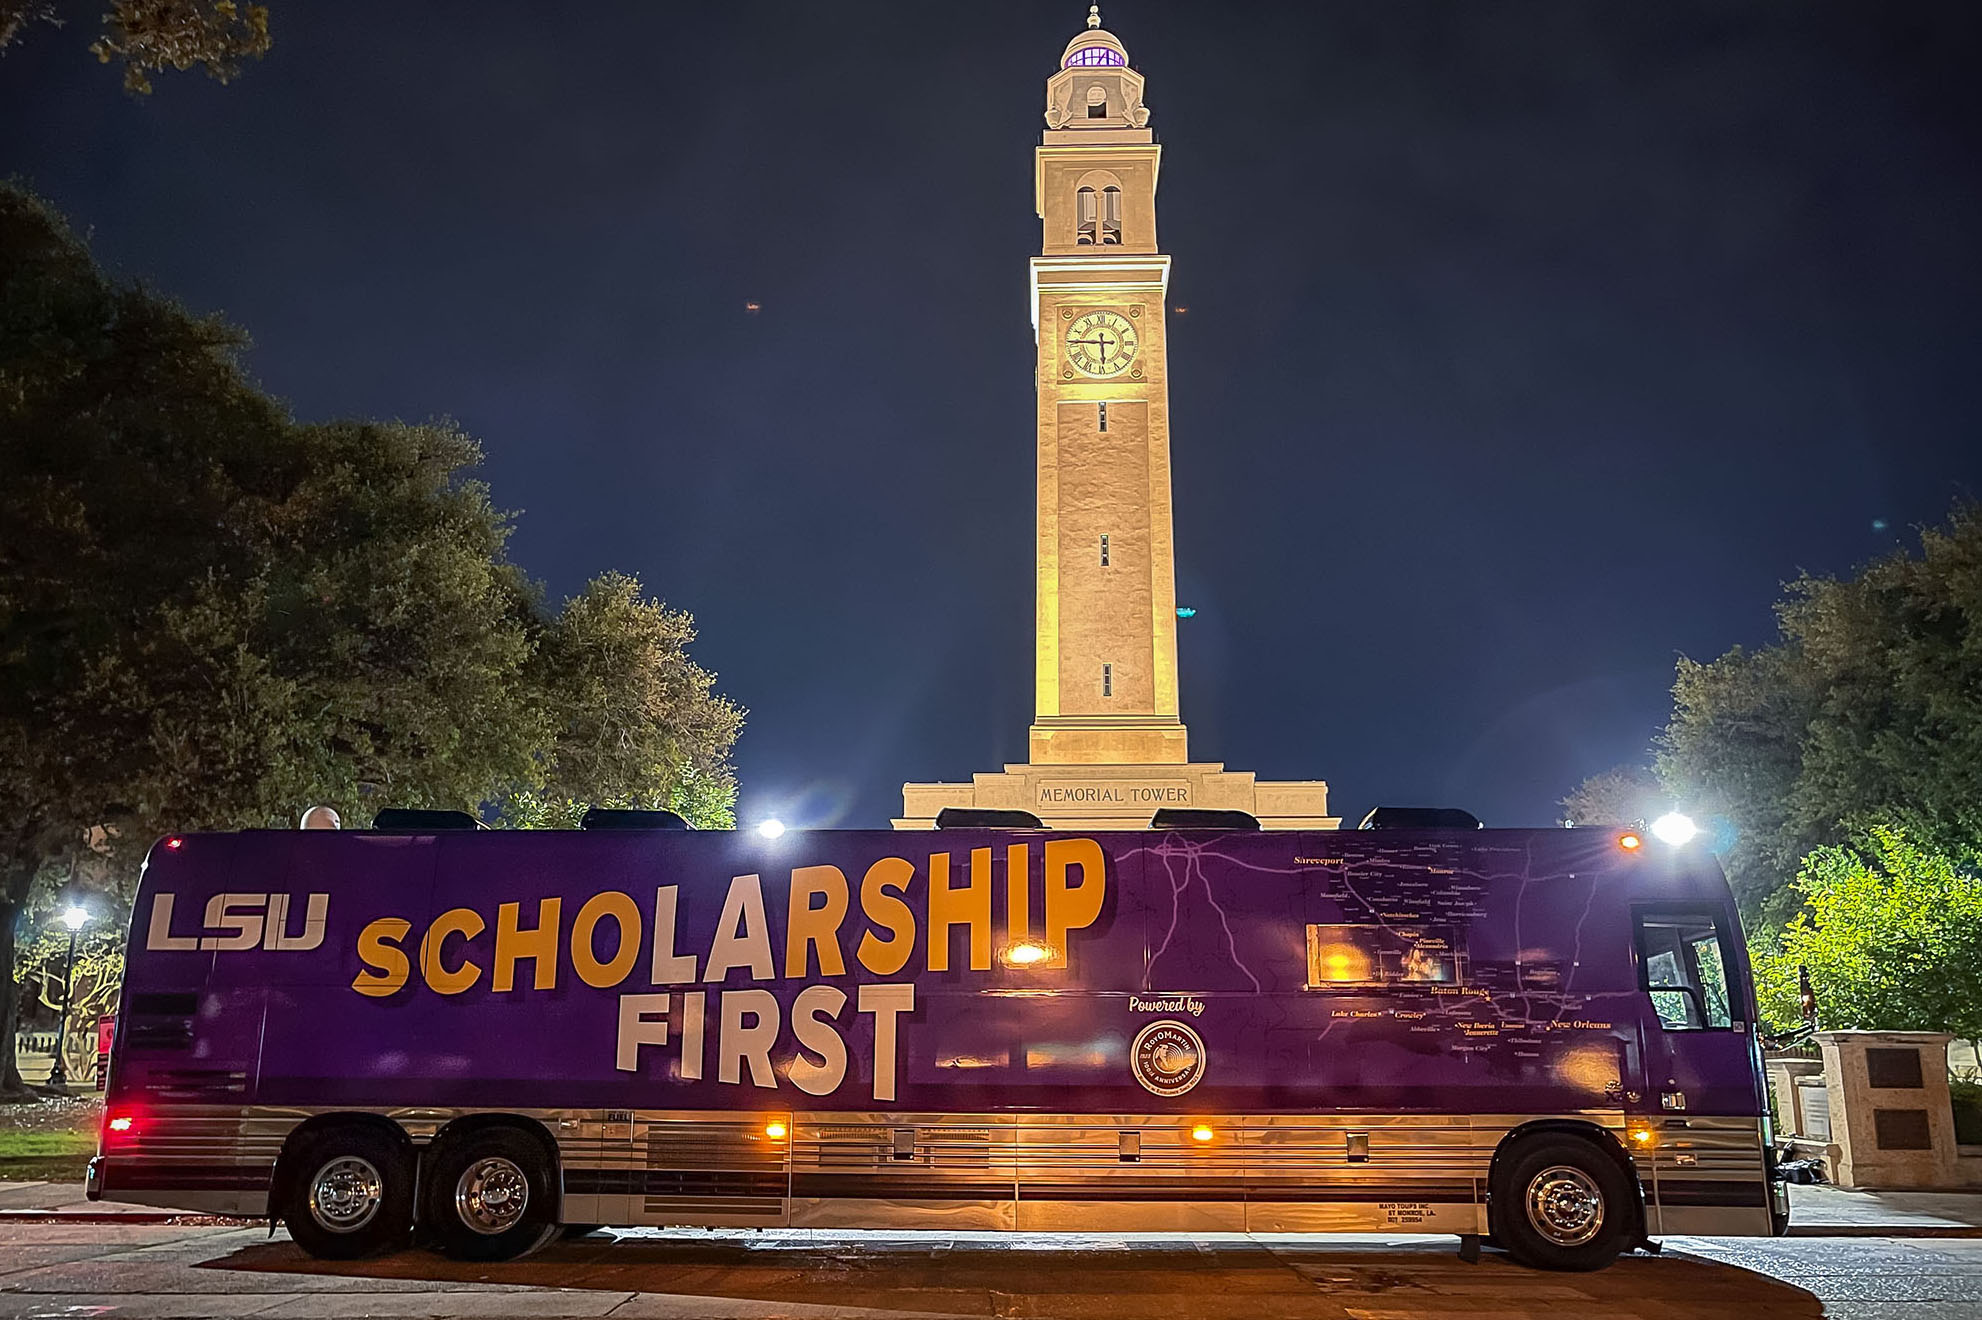 Scholarship First bus in front of Memorial Tower on the LSU campus